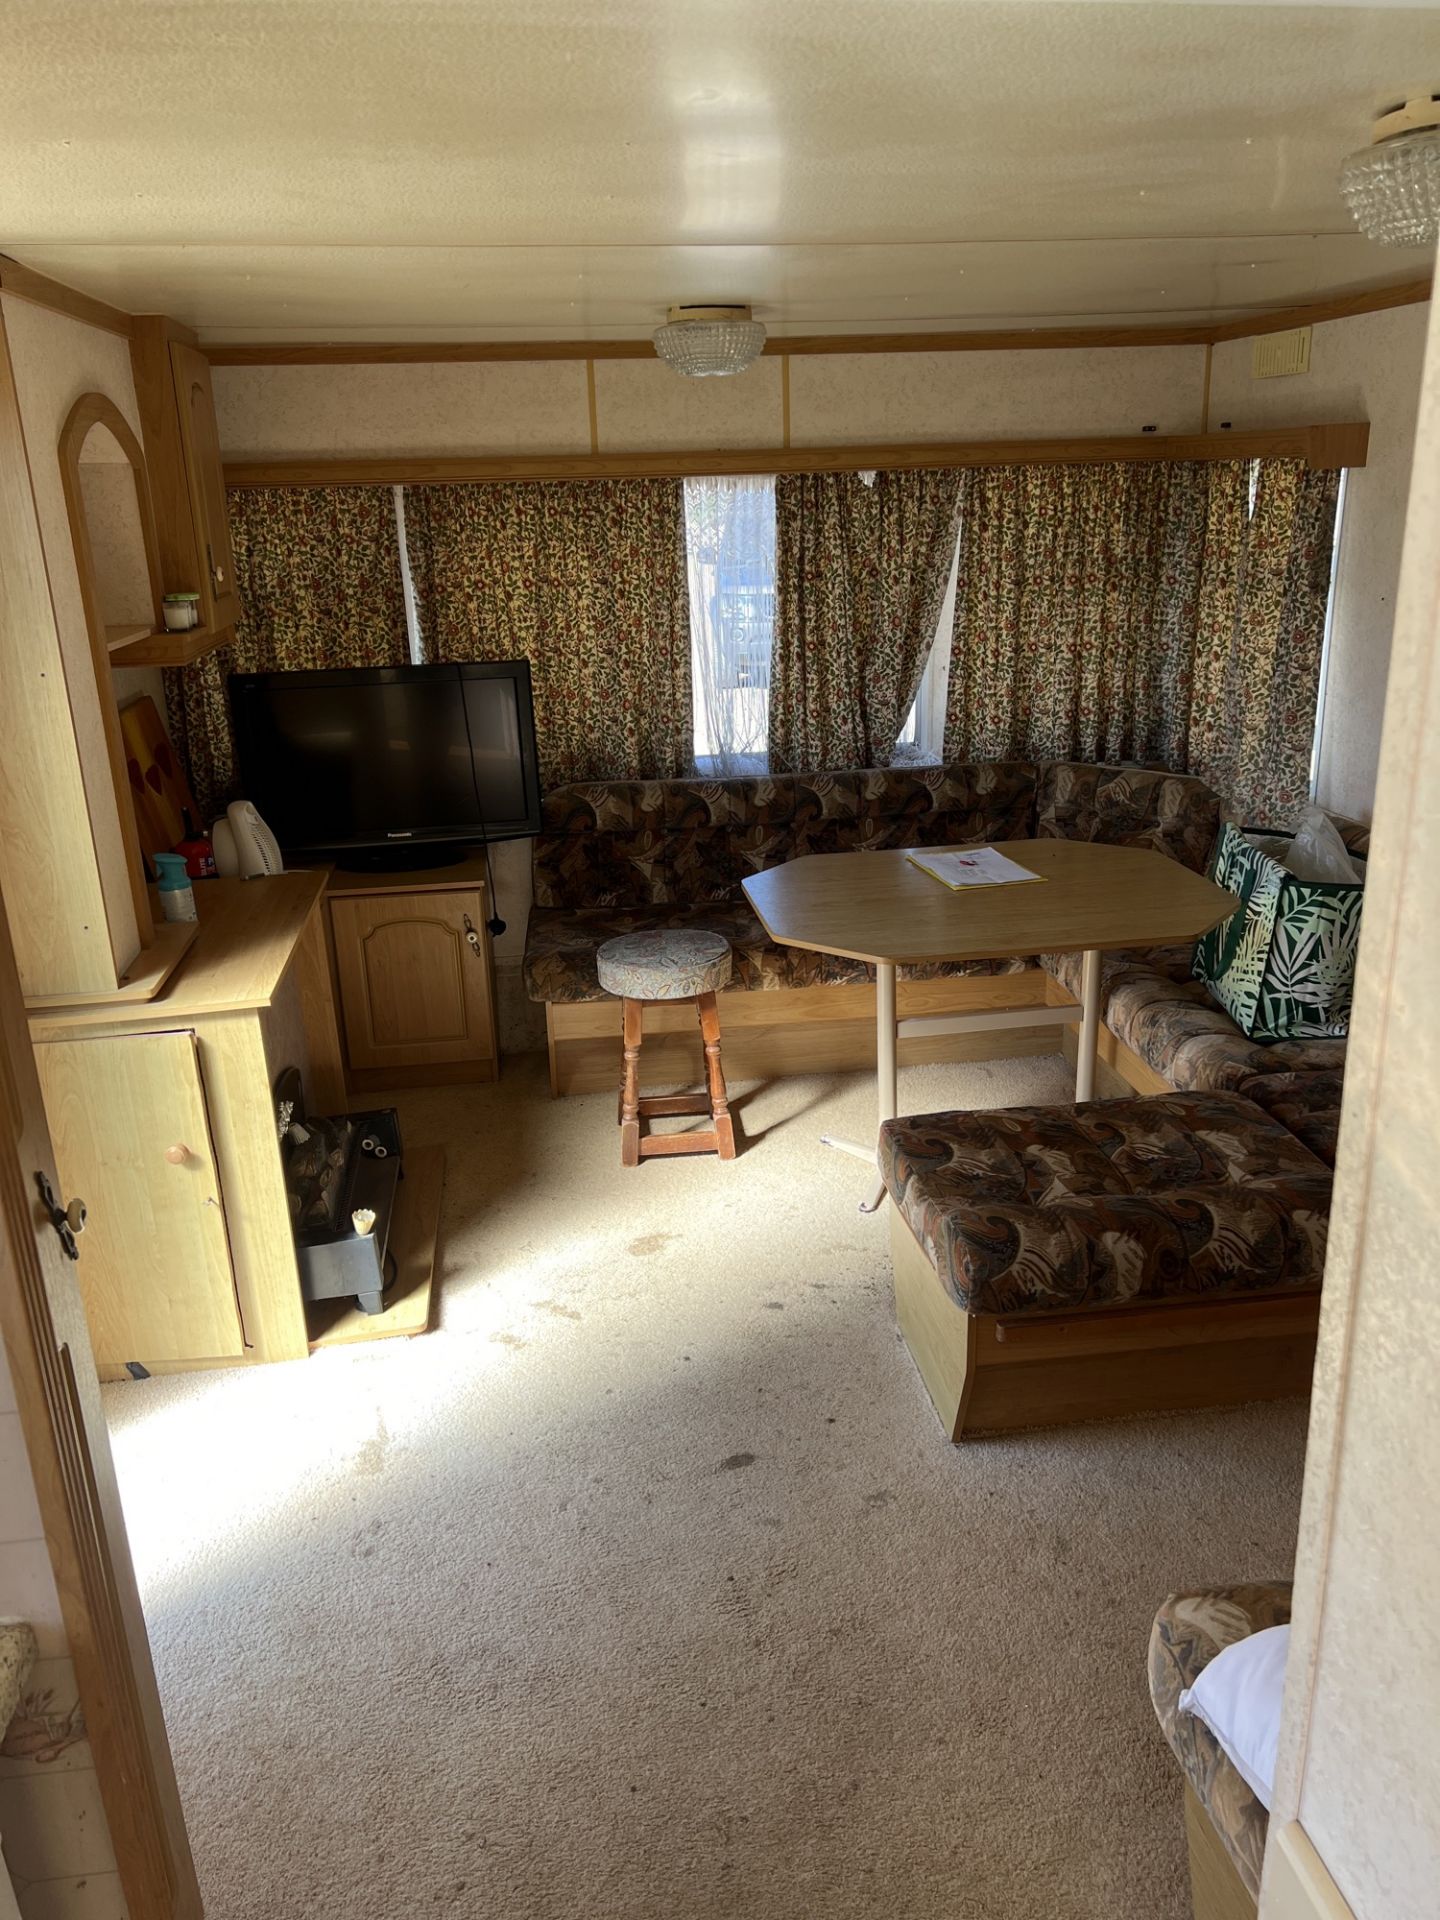 36ft mobile home - Image 9 of 14